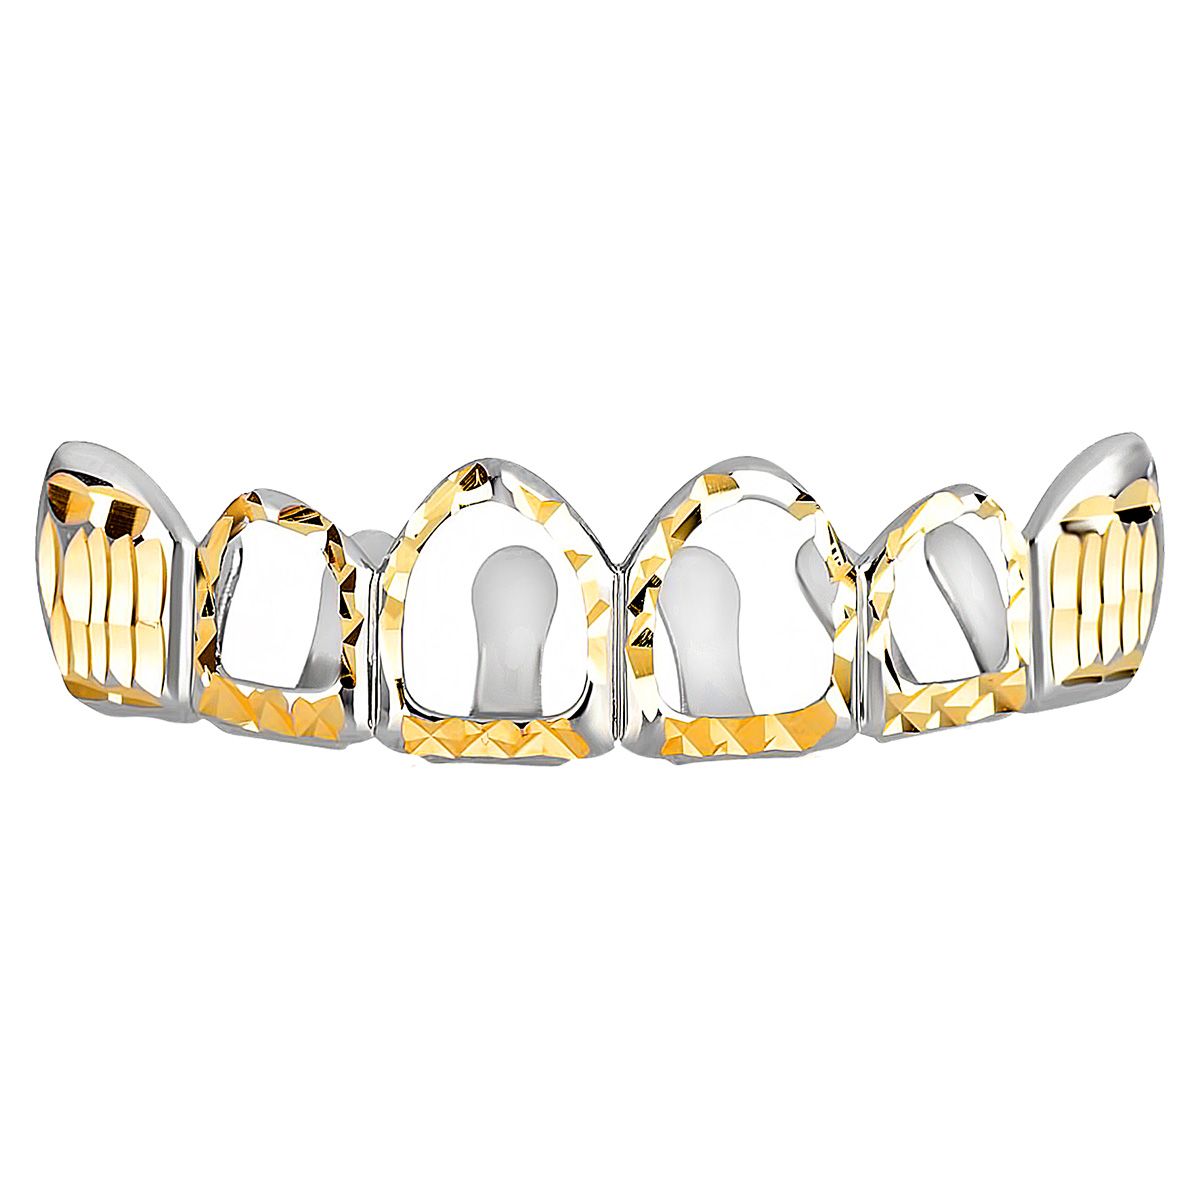 Silber Diamond Cut Grillz – One size fits all – HOLLOW Top